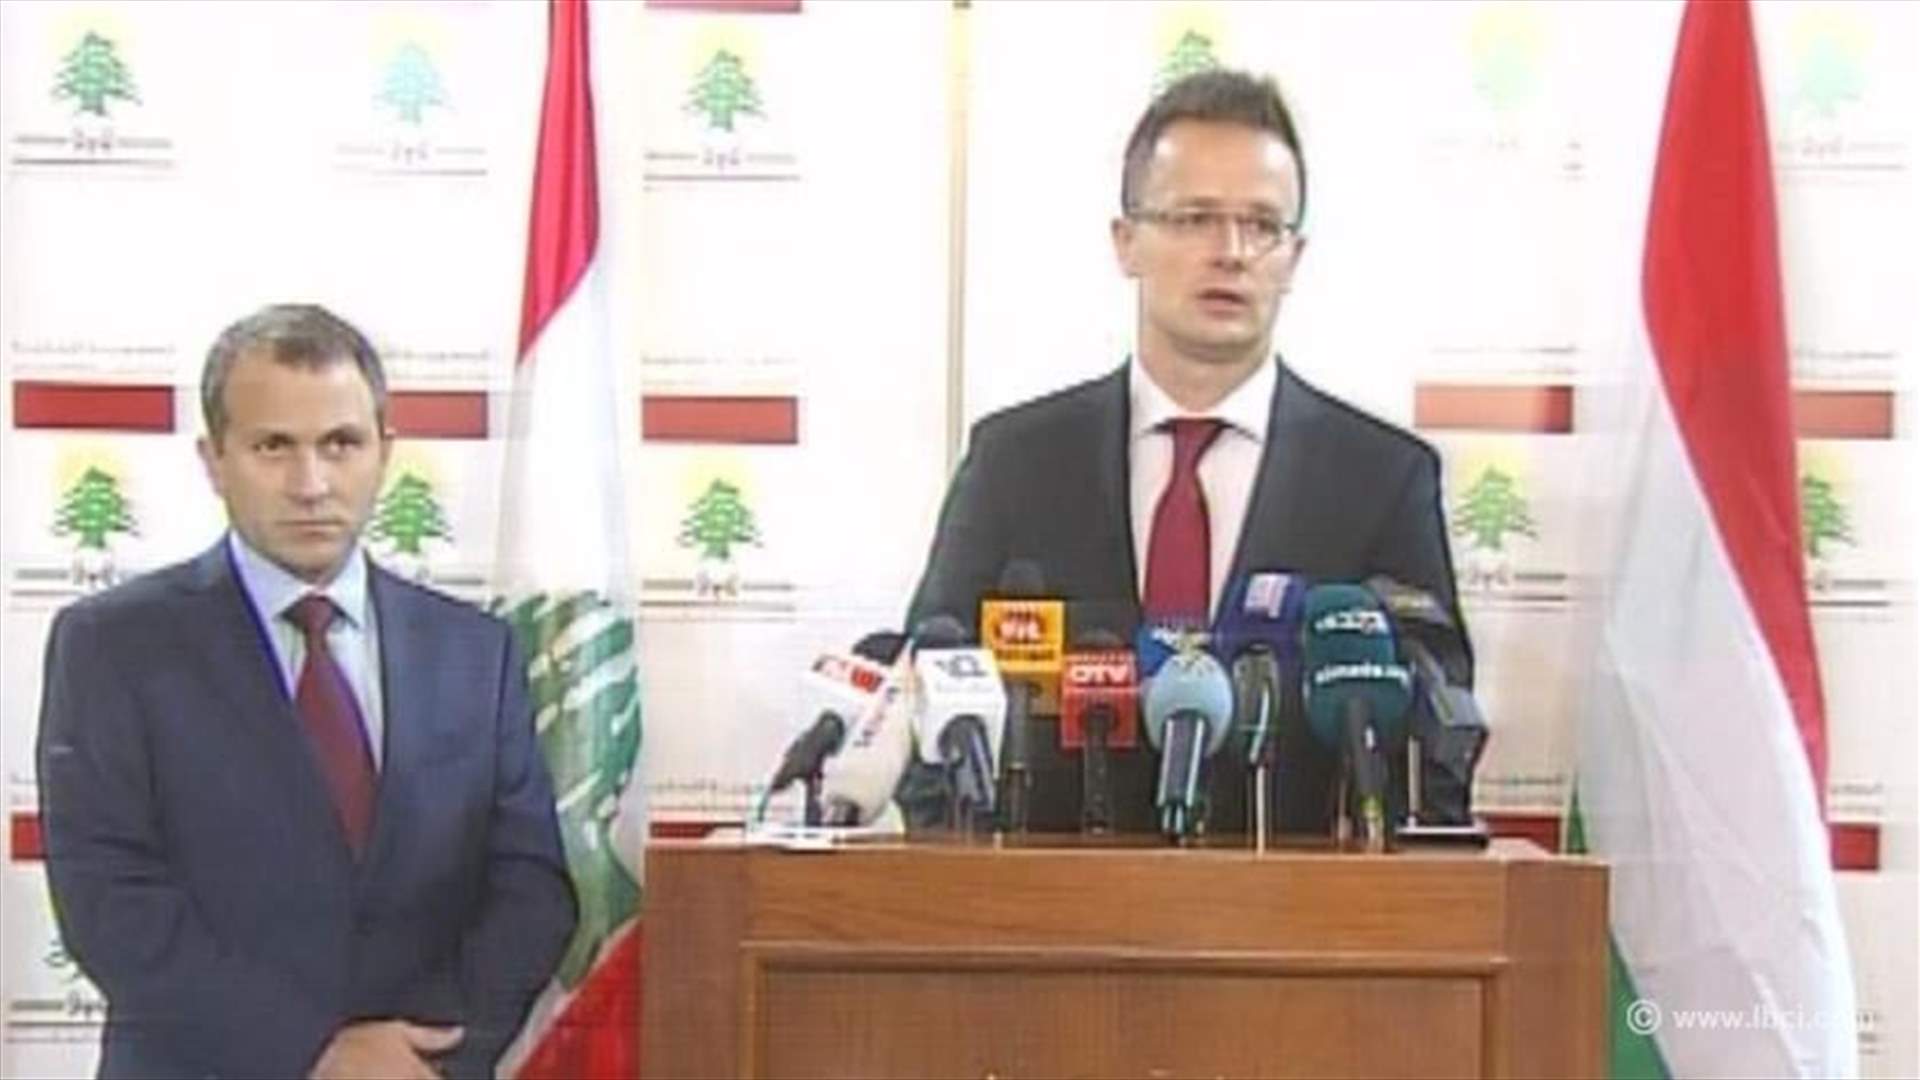 FM Bassil after meeting Hungarian counterpart: Lebanon faces existential threats 